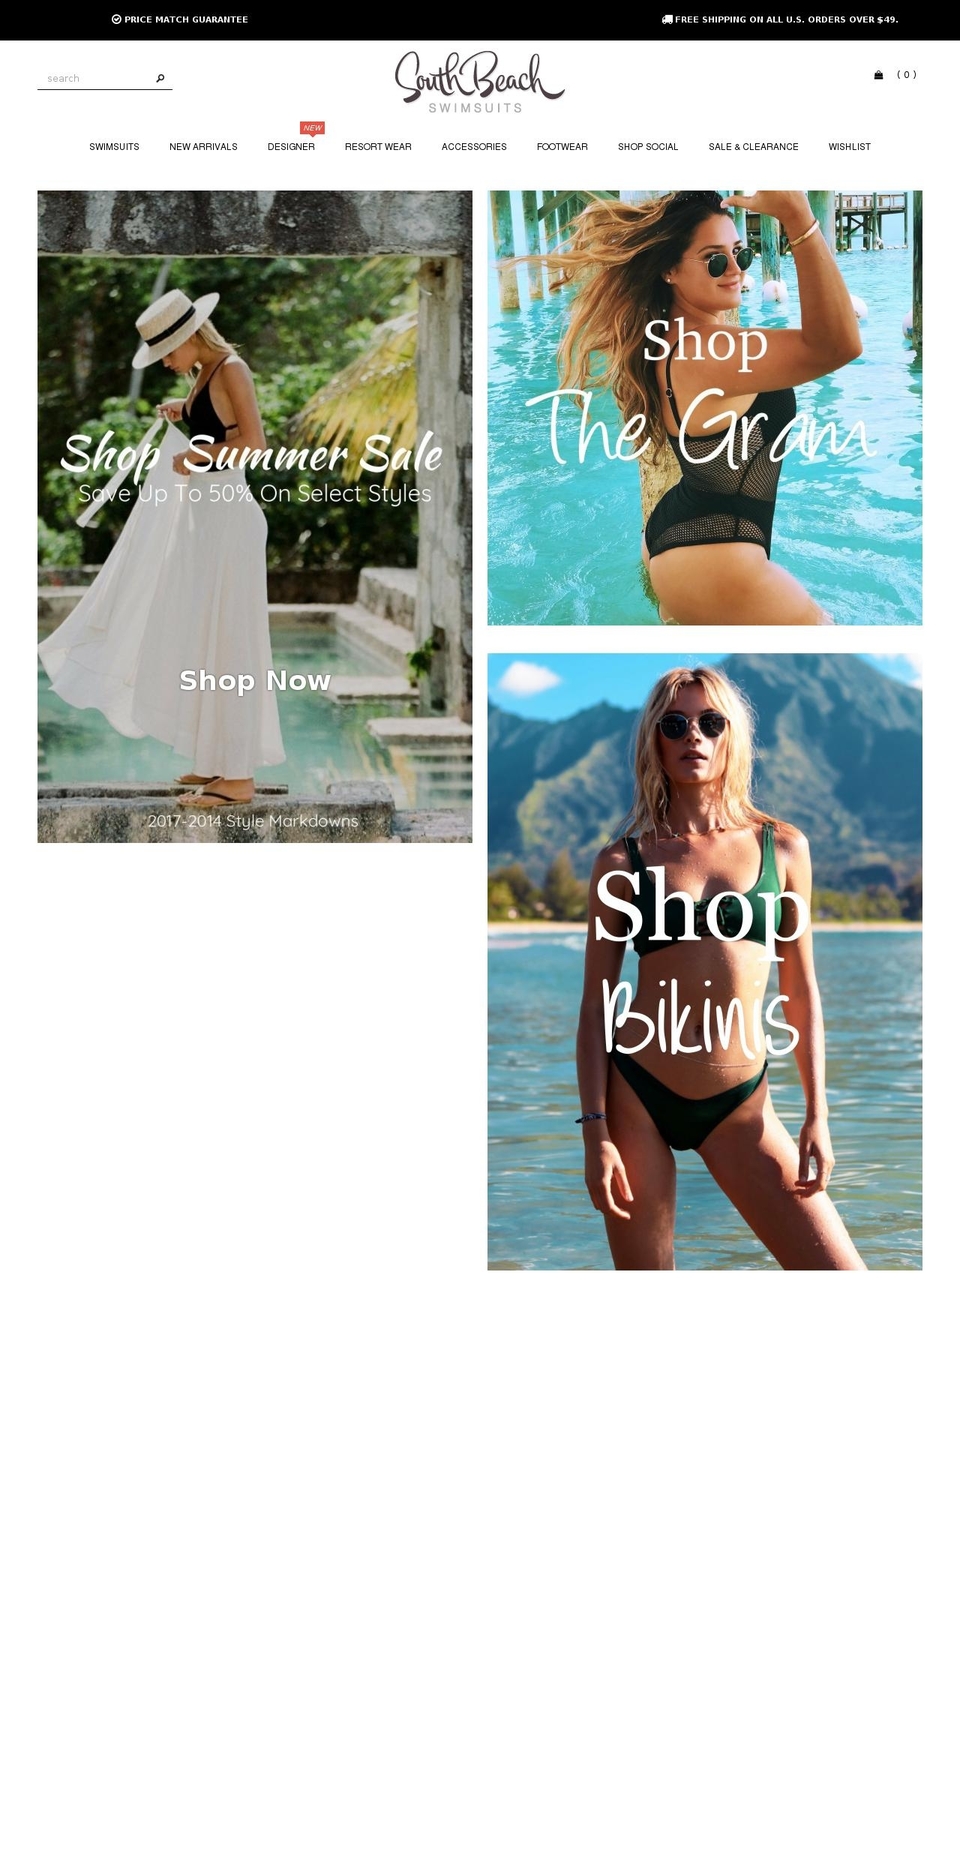 Made With ❤ By Minion Made - Updated Checkout Shopify theme site example ladyluxbathingsuits.com